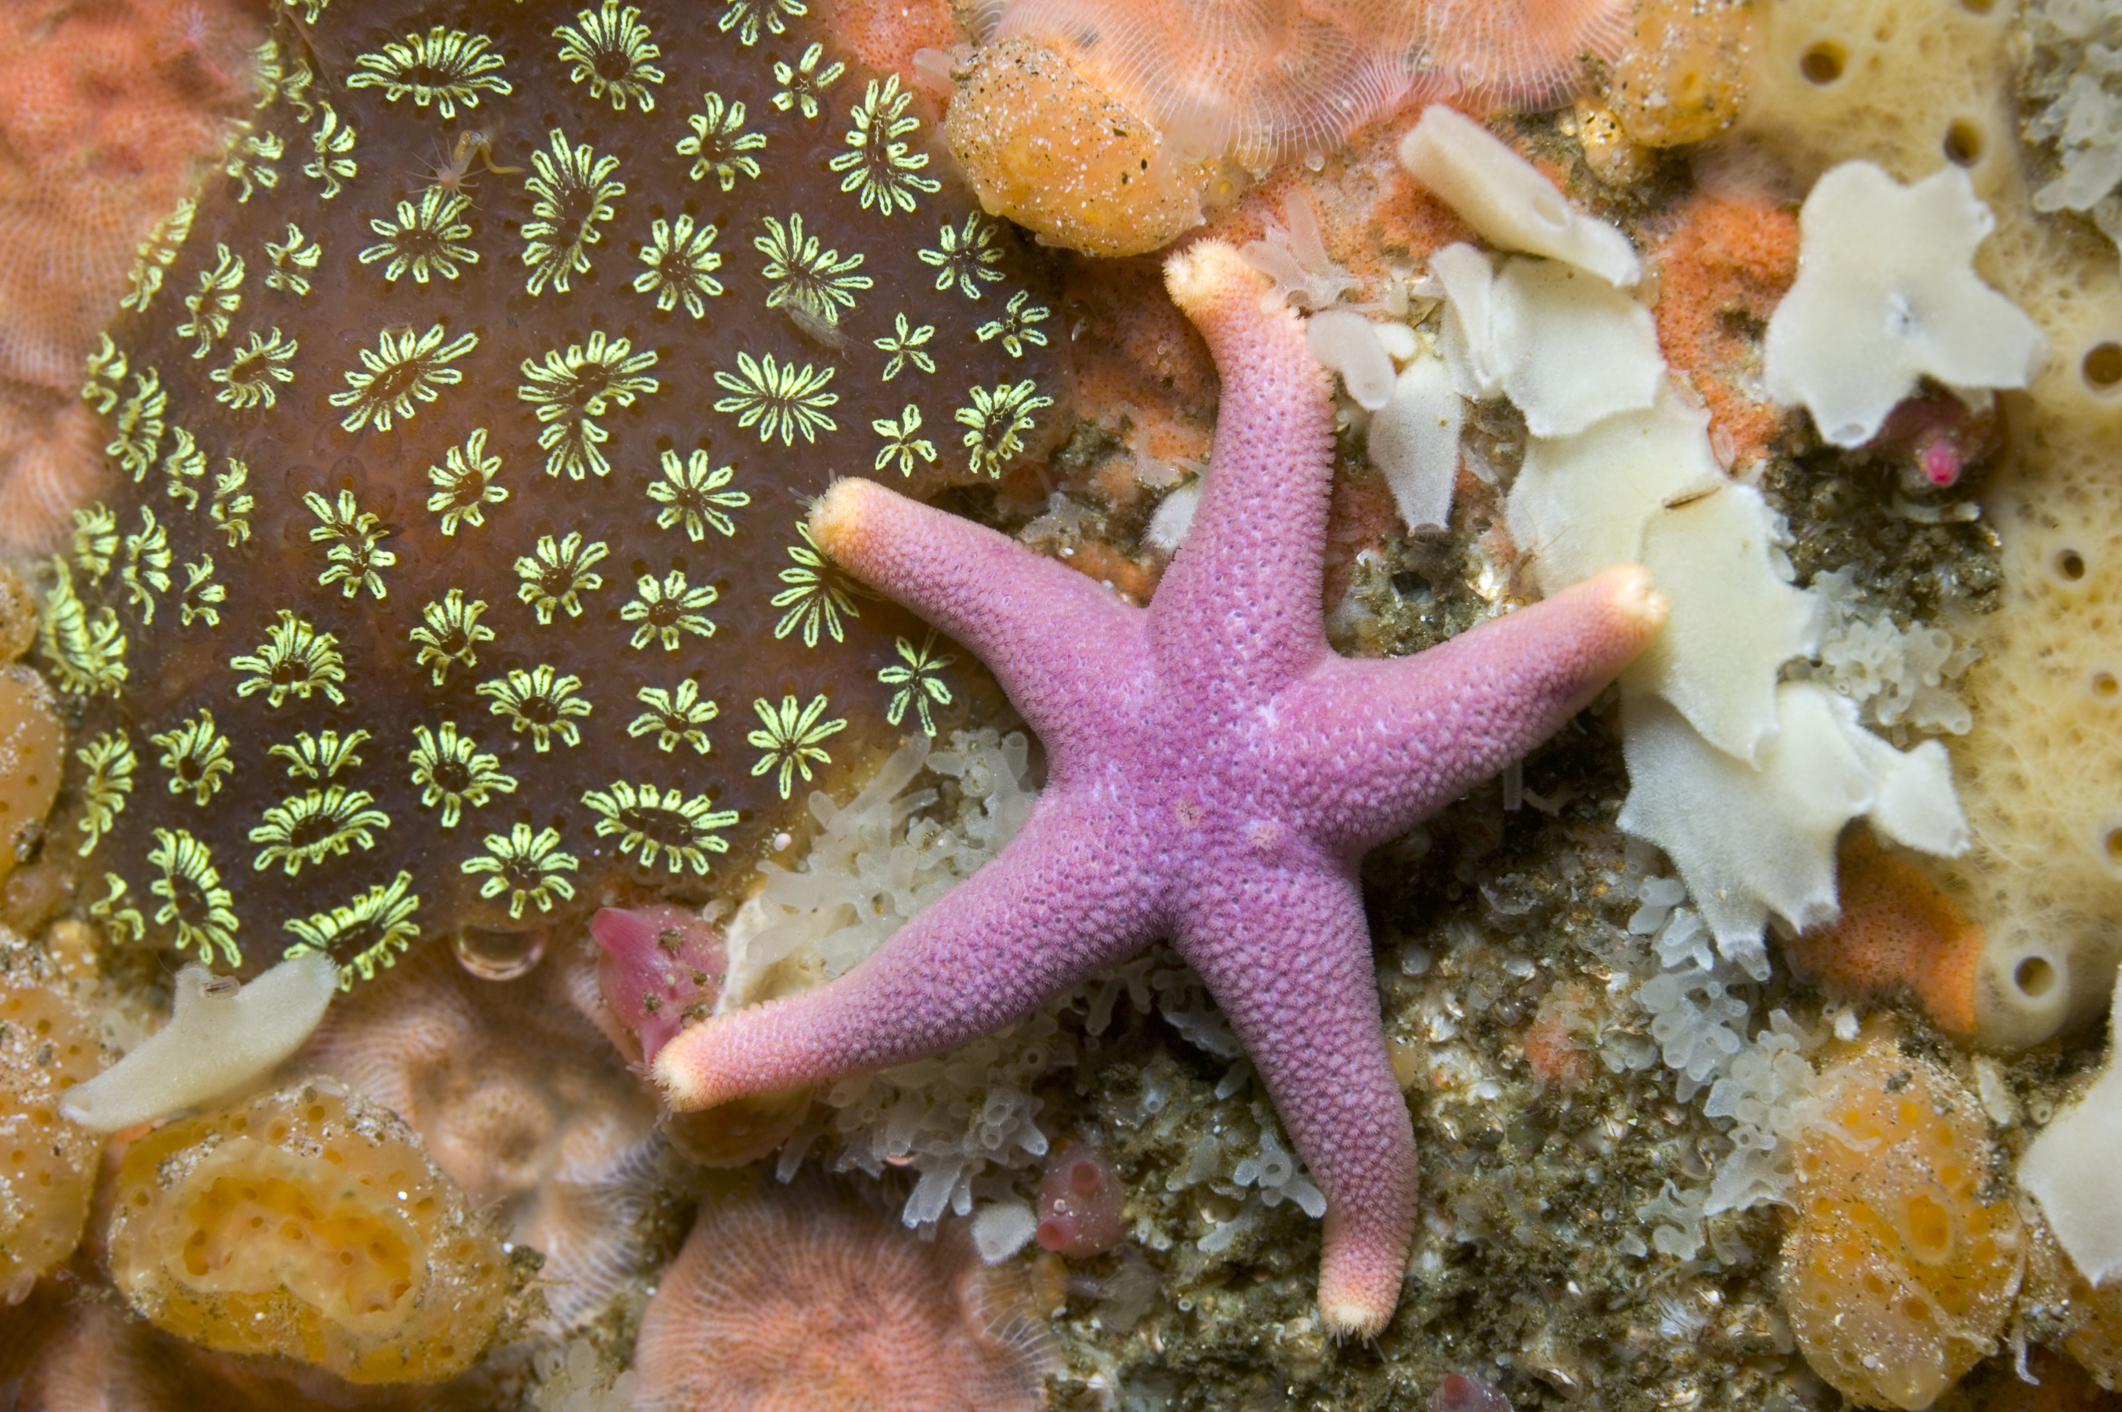 Do starfish have arms or legs, and how many do they have